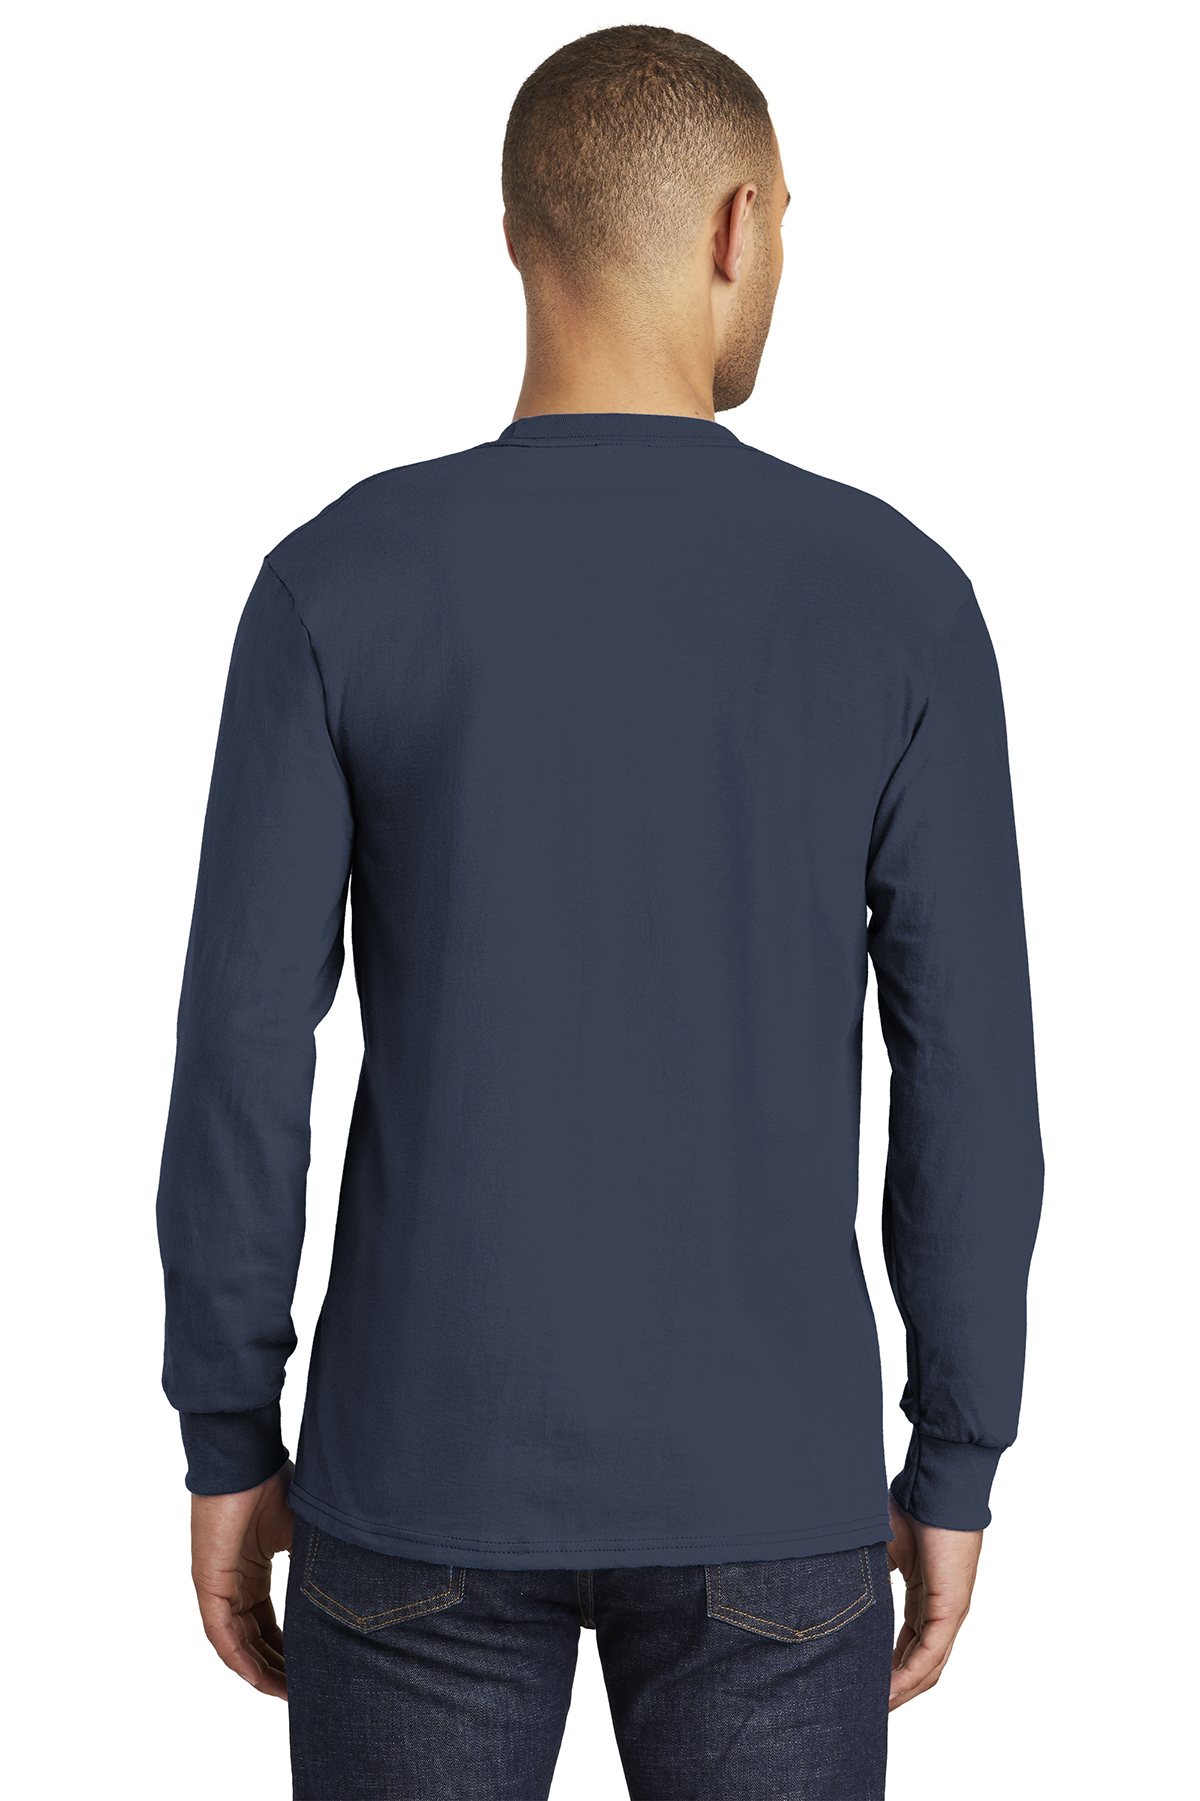 Port & Company Tall Long Sleeve Essential Pocket Tee | Product | Port ...